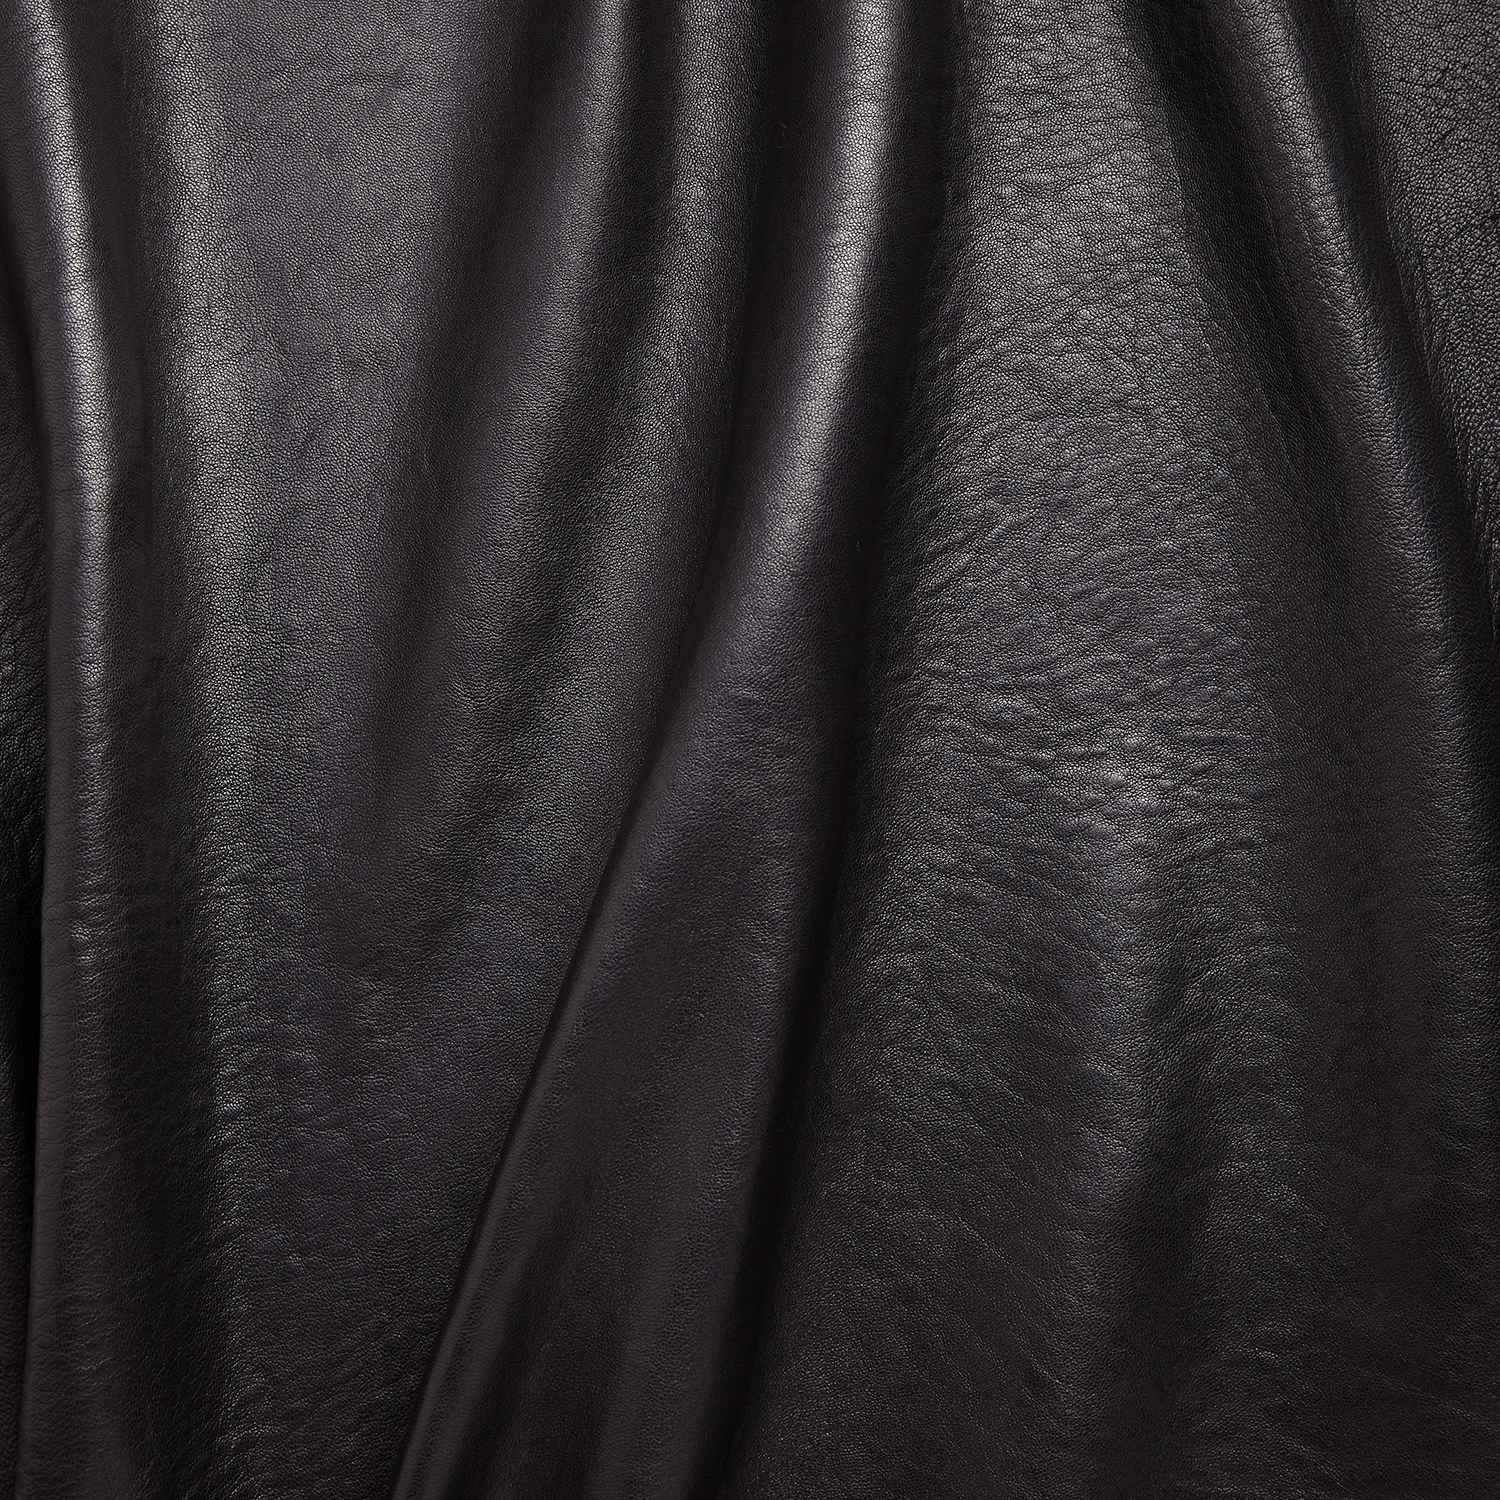 Matte Black or White Vegan Leather Fabric for Upholstery Faux Leather  Fabric in Lambskin Pattern 